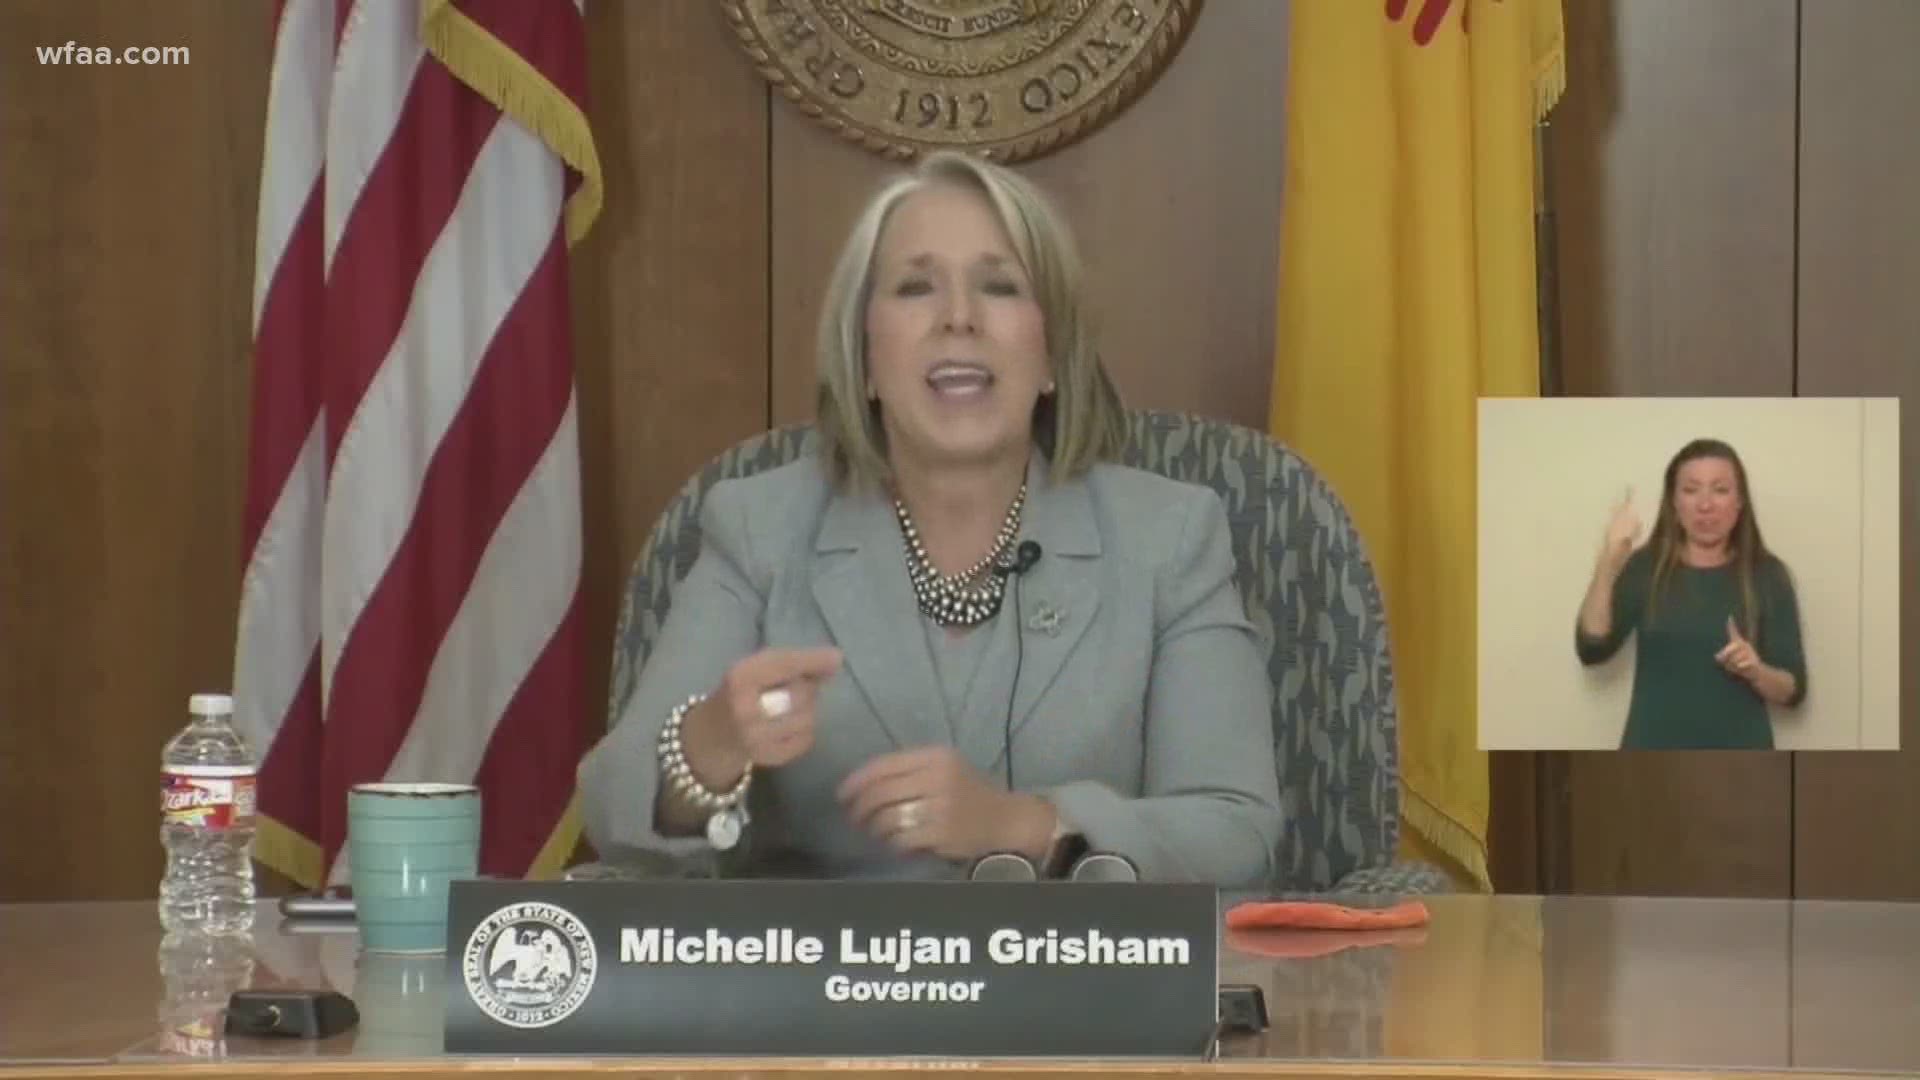 Governor Michelle Lujan Grisham announced Wednesday that all out-of-state travelers would need to quarantine for 14 days to help curb the spread of COVID-19